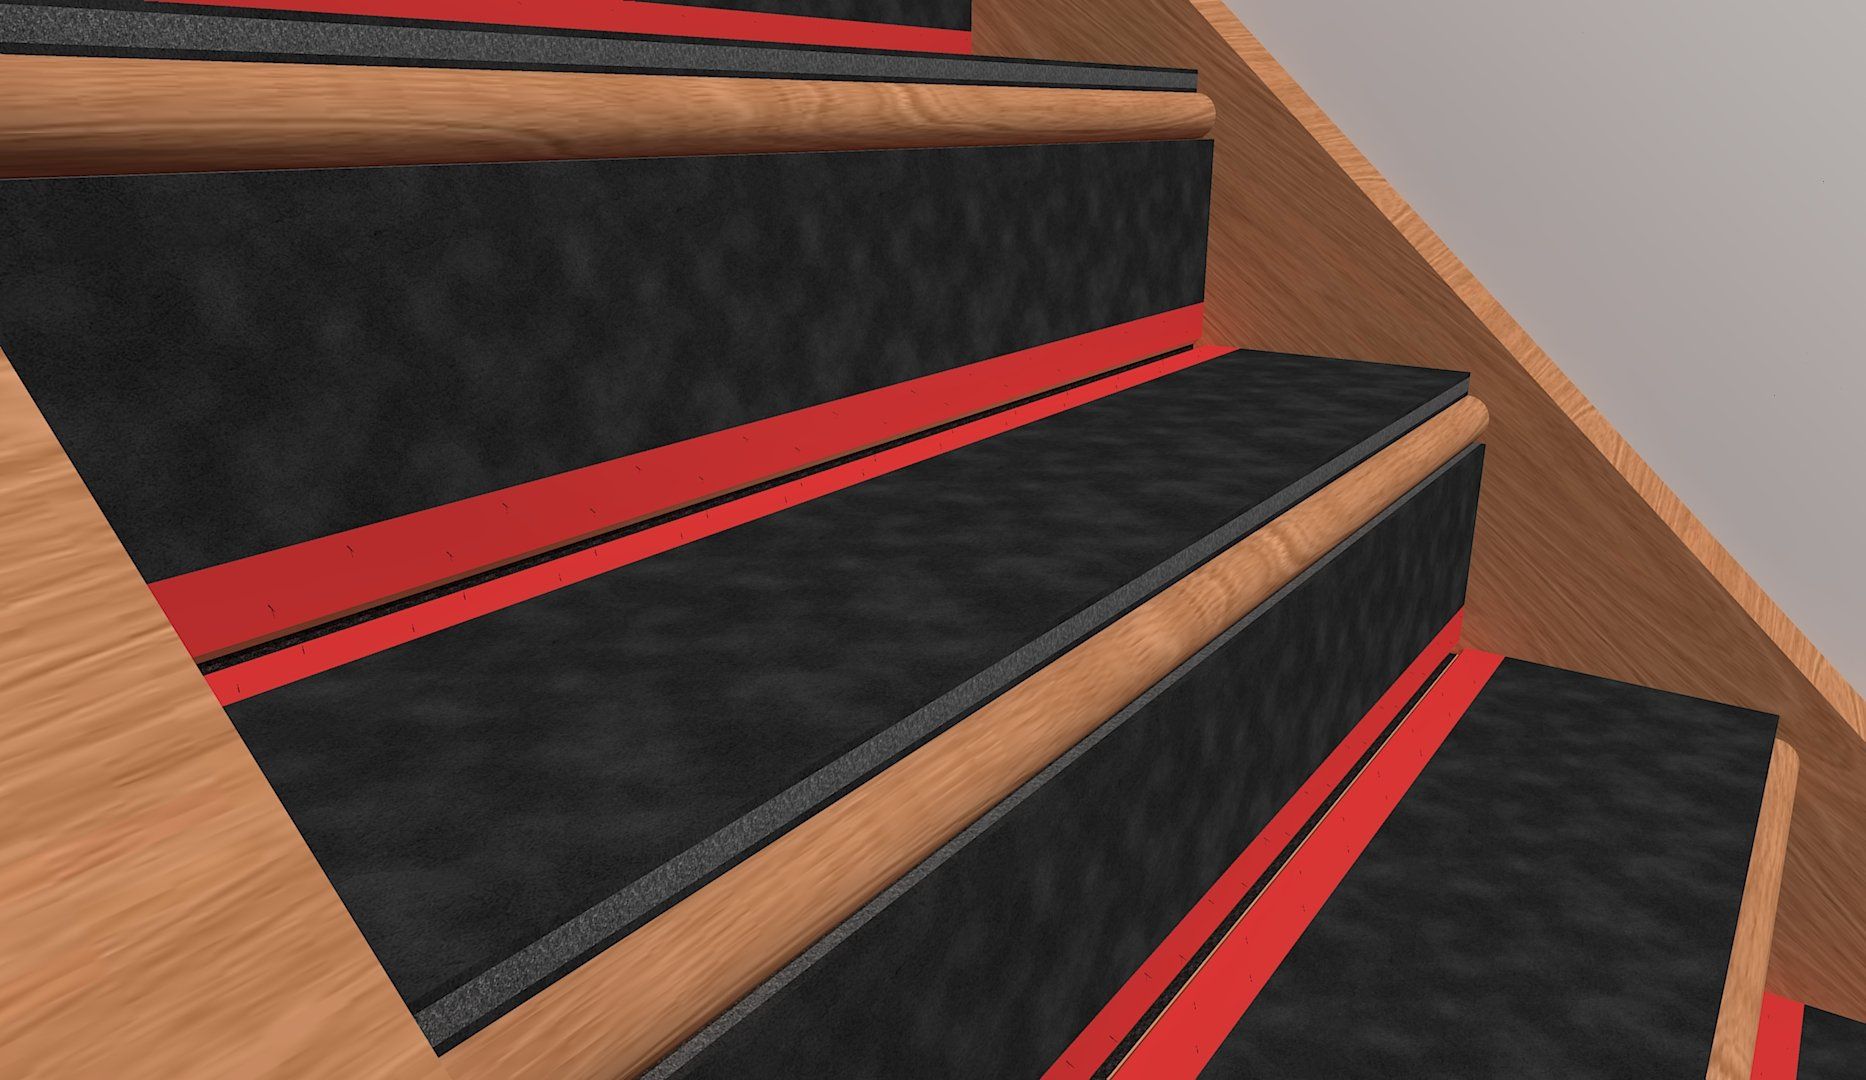 Soundproofing Stairs with SoundMats and carpet grippers